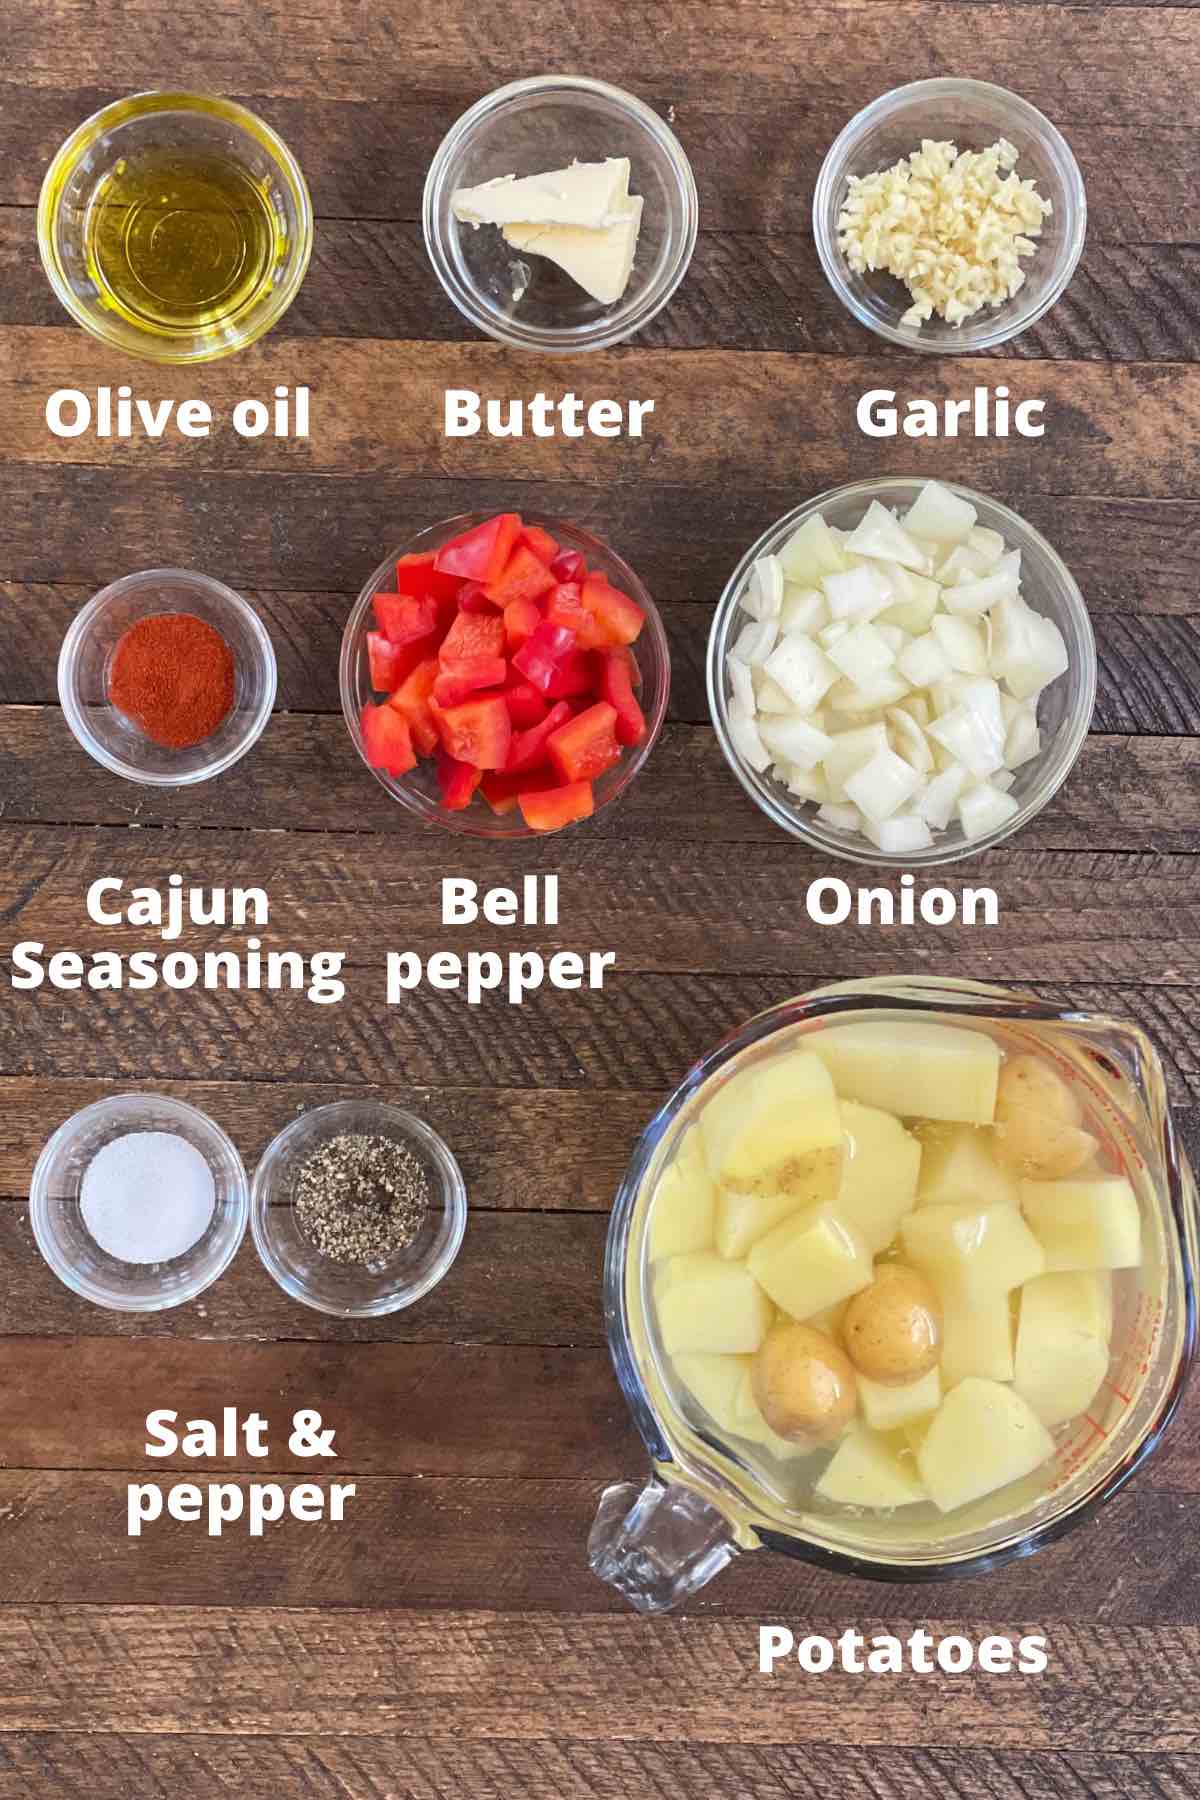 Ingredients for smothered potatoes